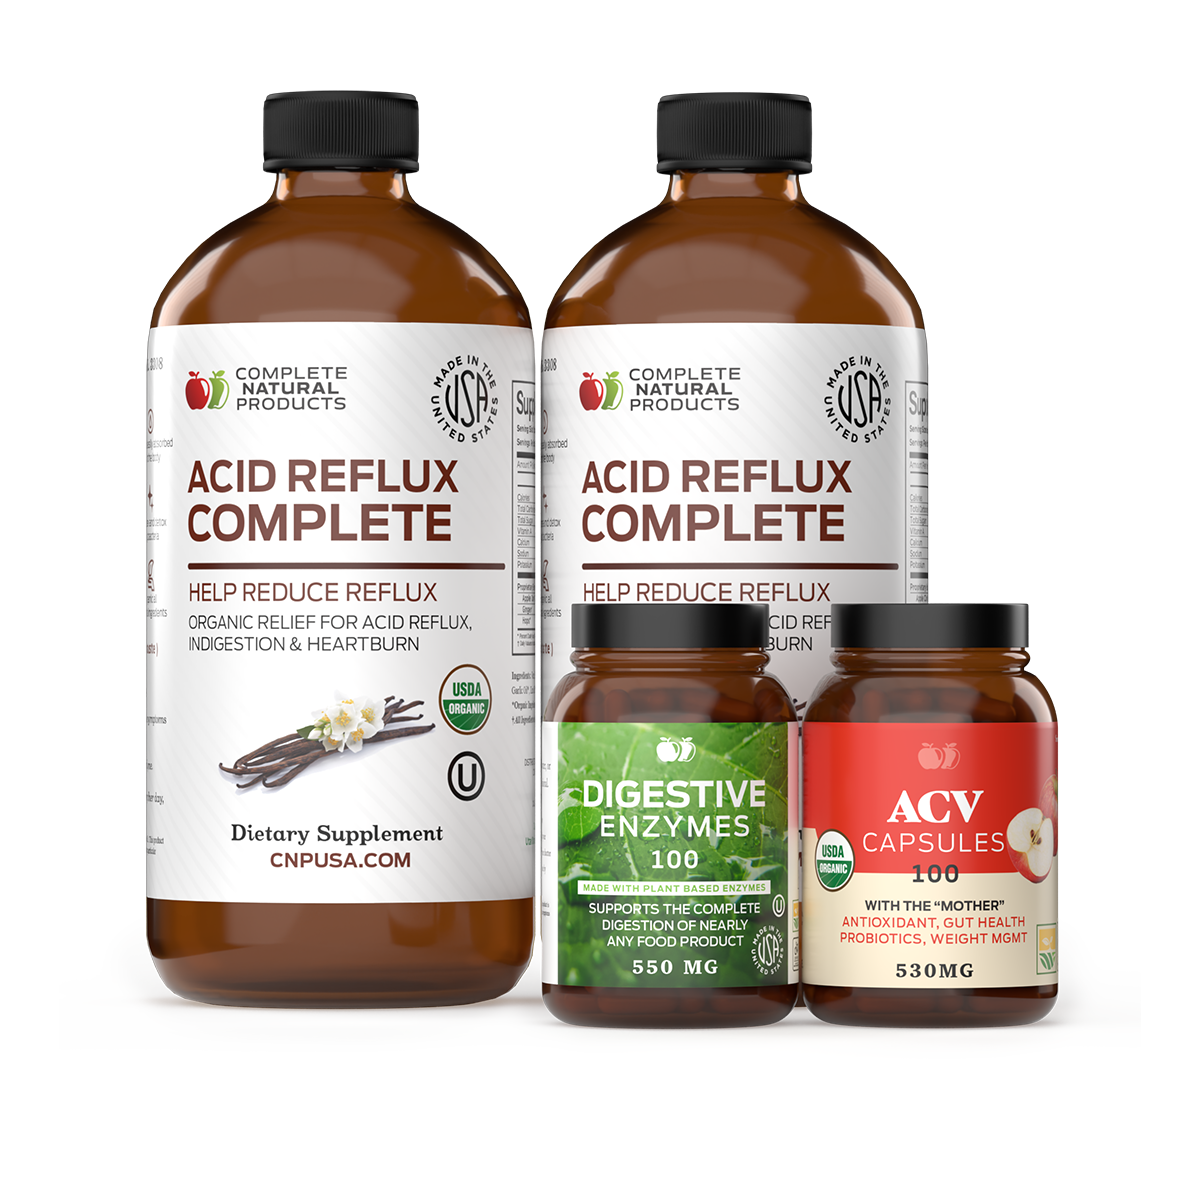 Acid Reflux Bundle with Digestive Enzymes and Apple Cider Vinegar (ACV) Capsules for natural relief and improved digestive health.